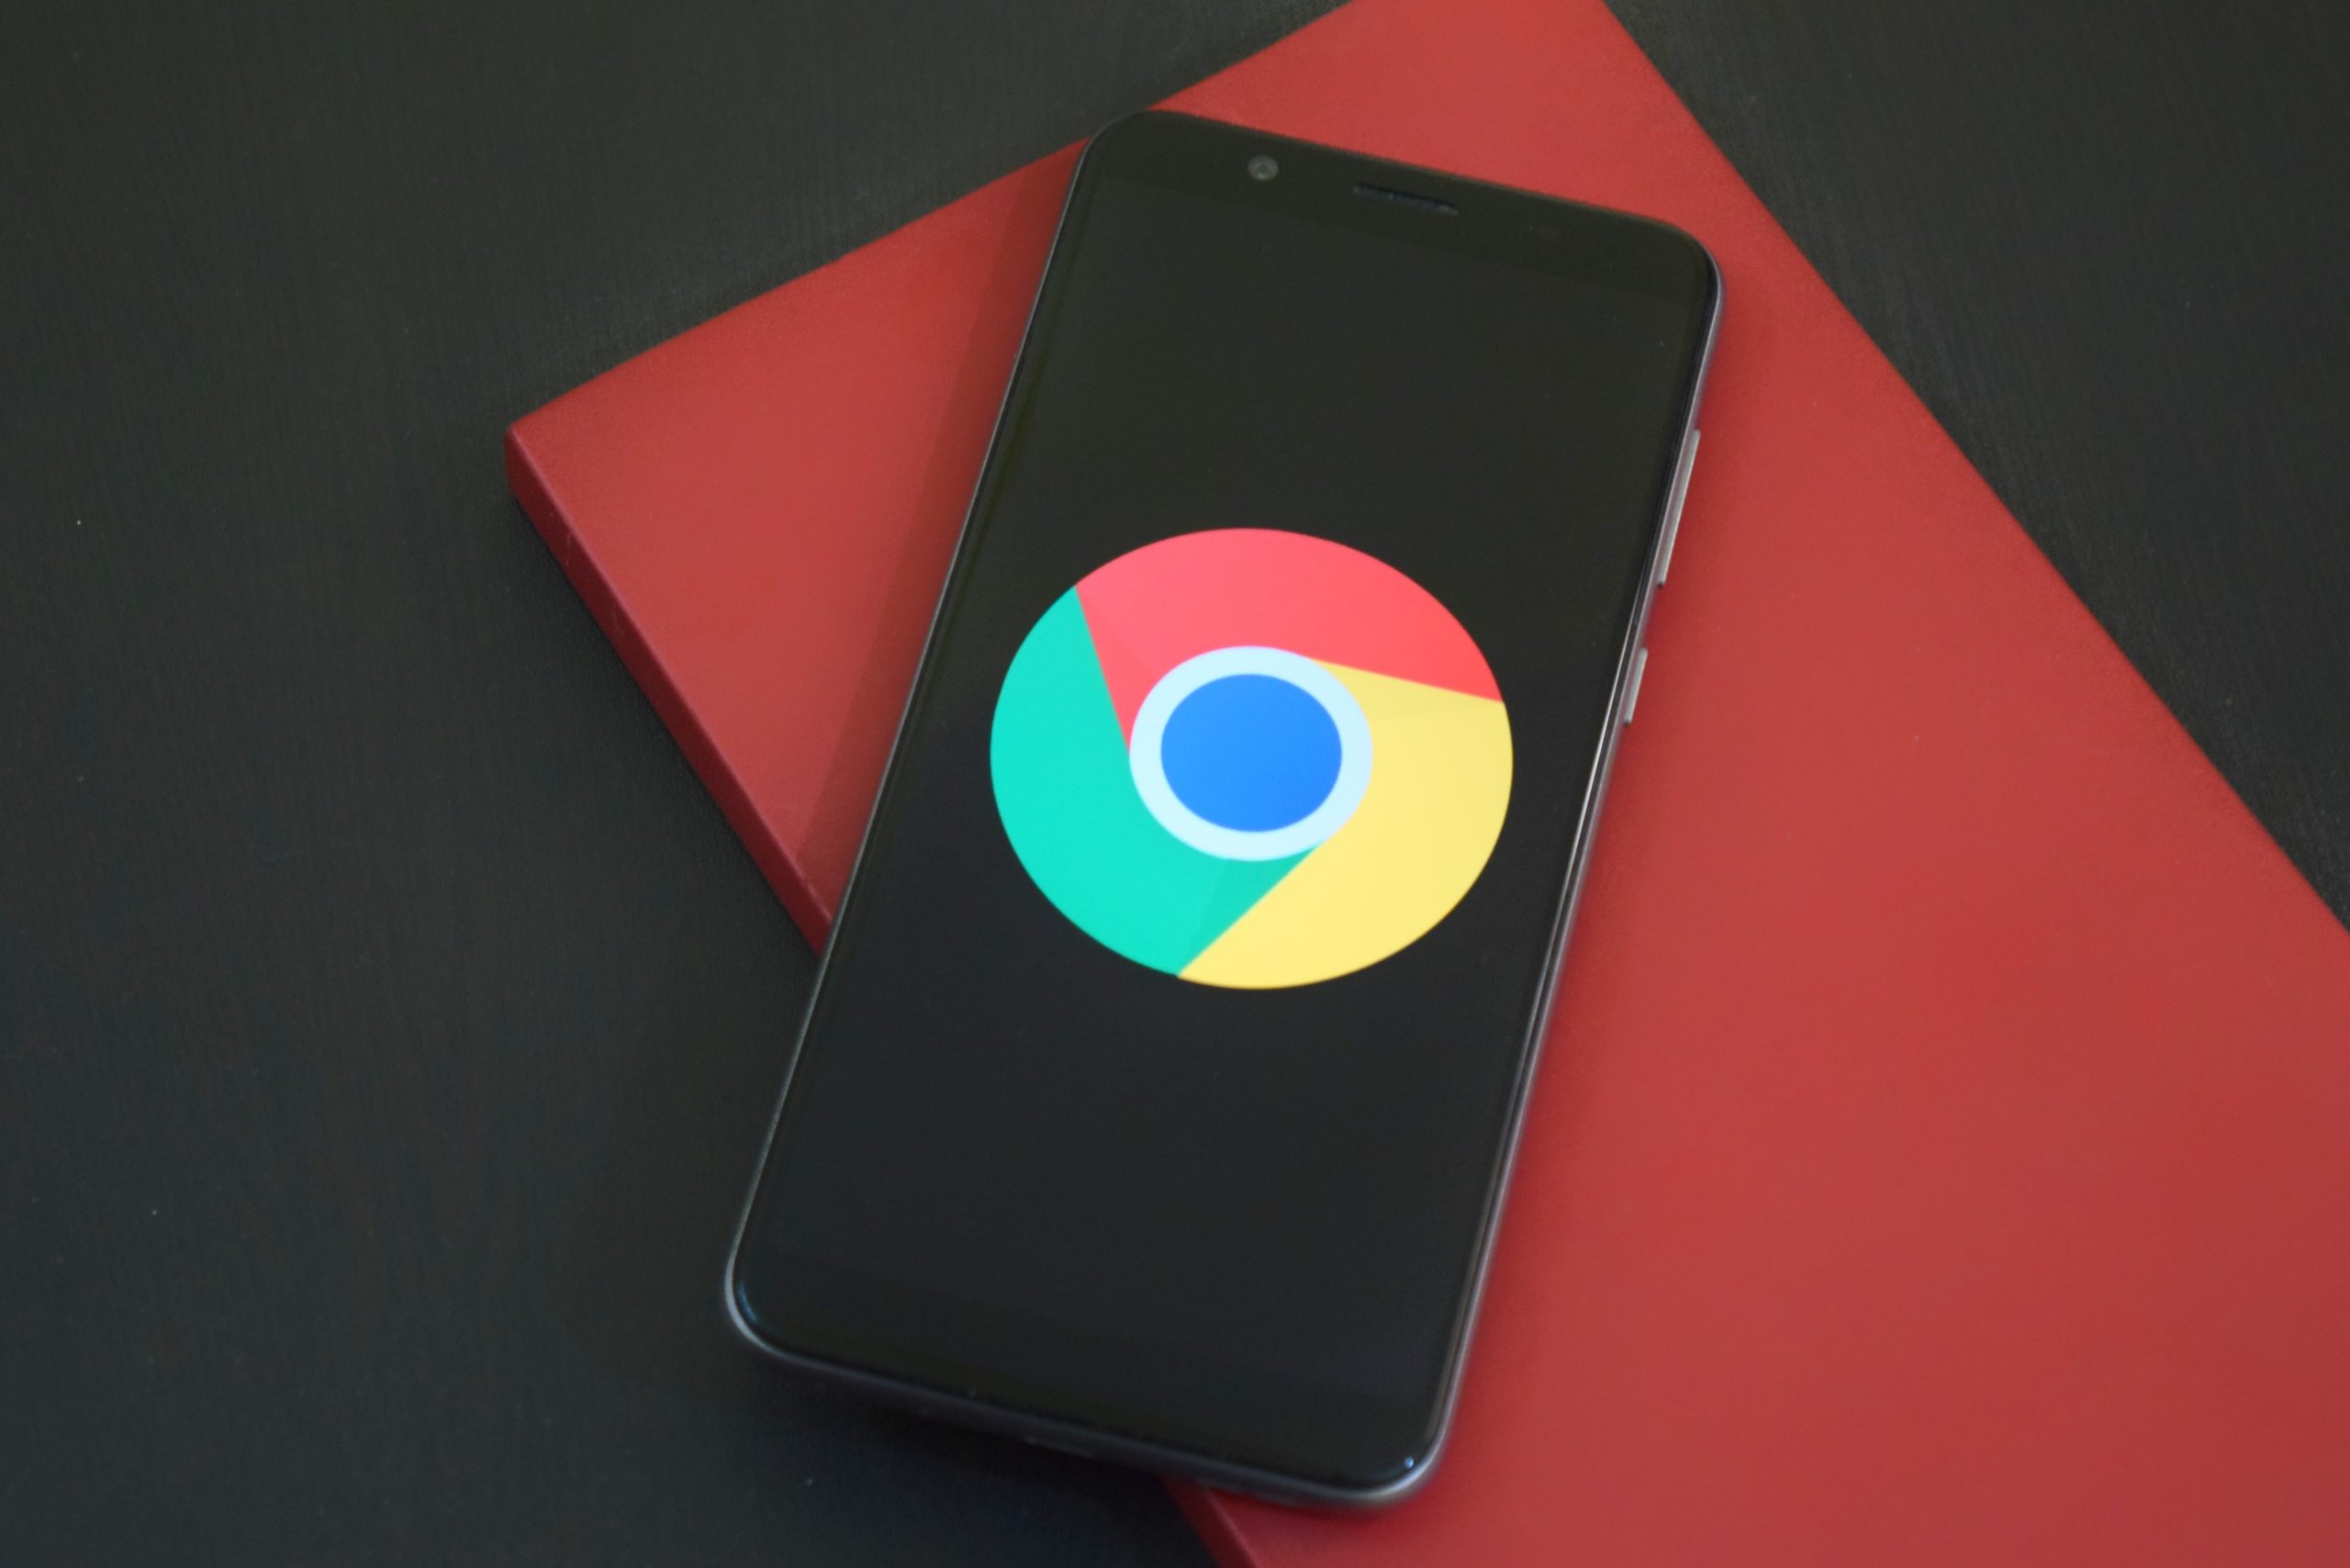 Making Chrome the Default Browser on Android